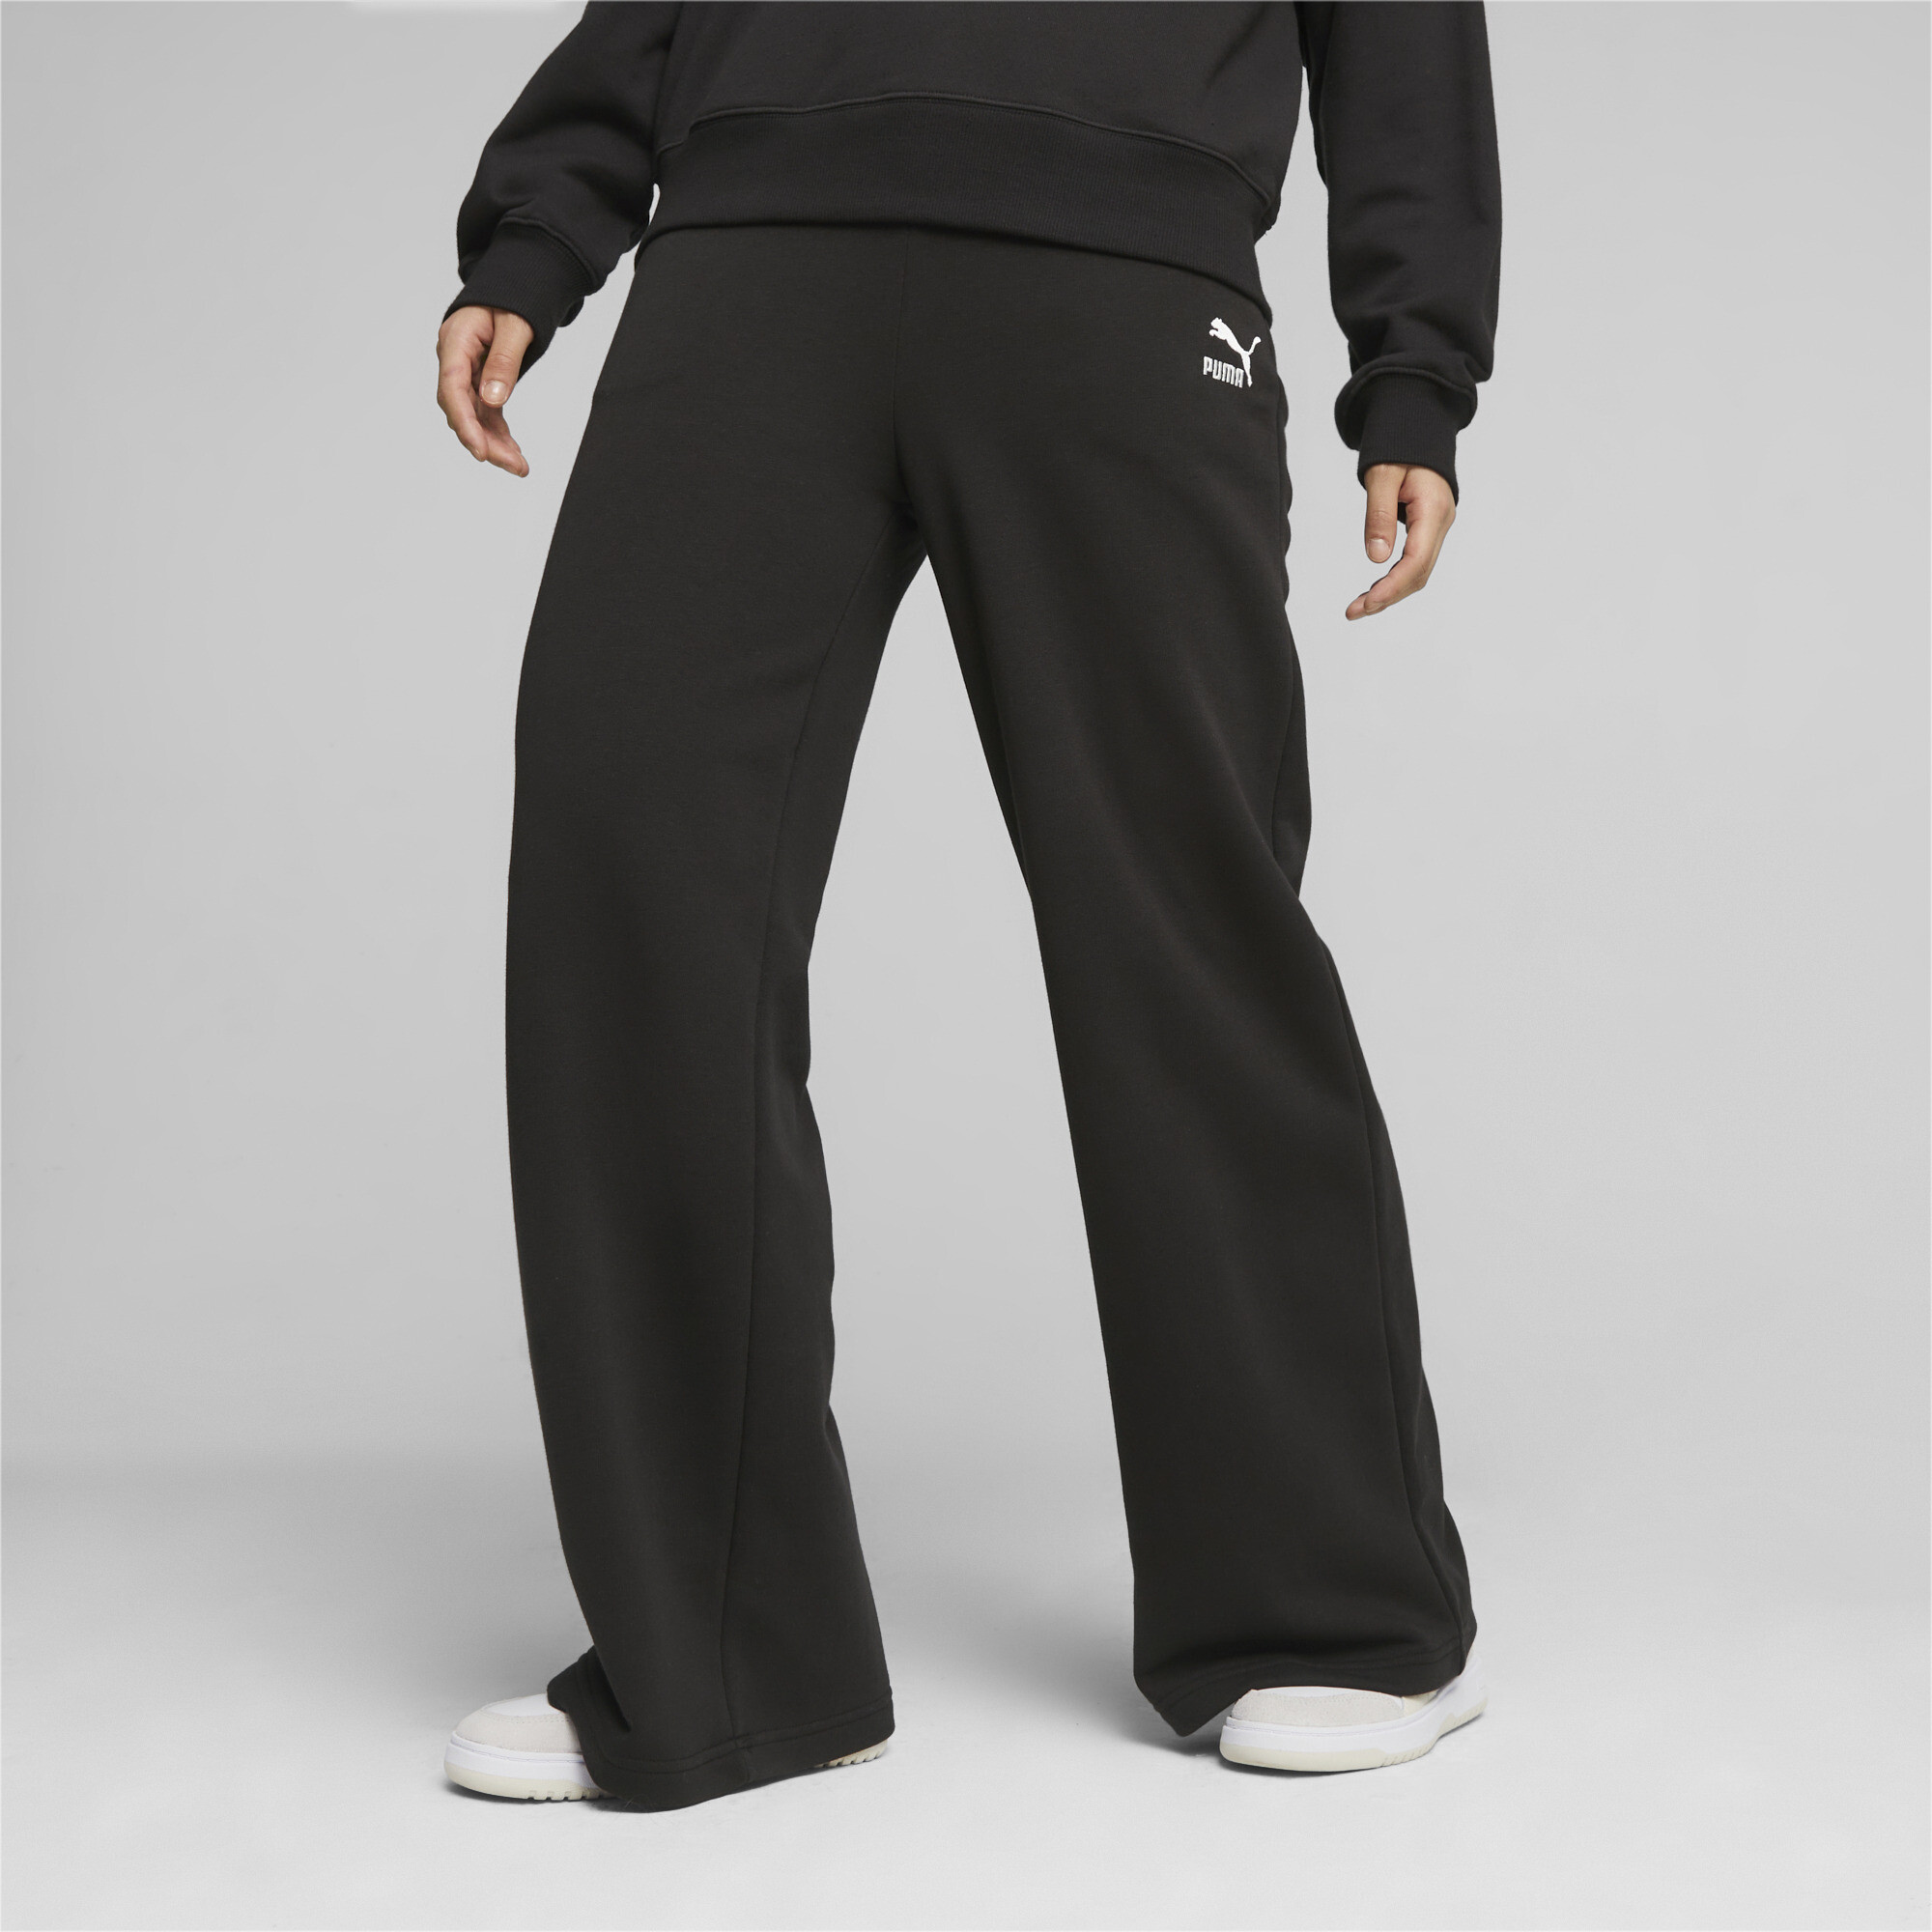 Women's PUMA CLASSICS Relaxed Sweatpants In Black, Size Small